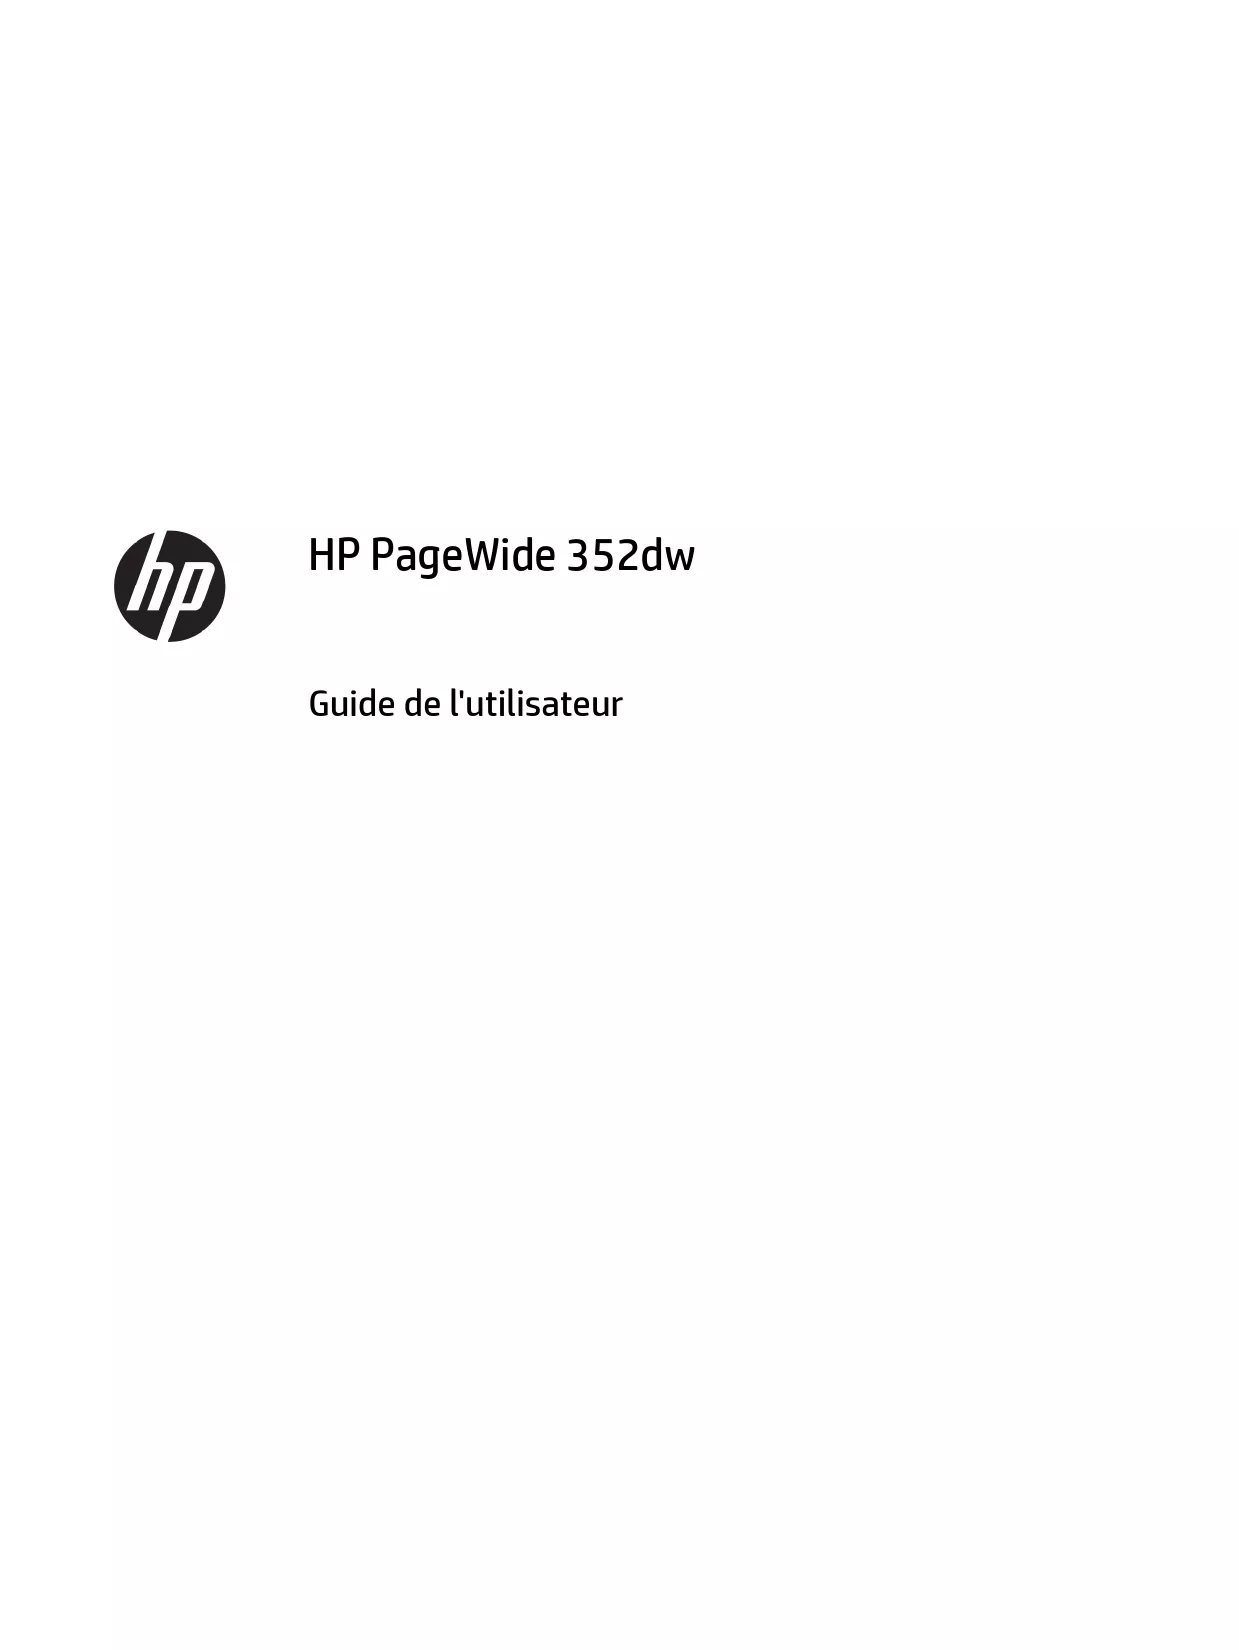 Mode d'emploi HP PAGEWIDE 352DW